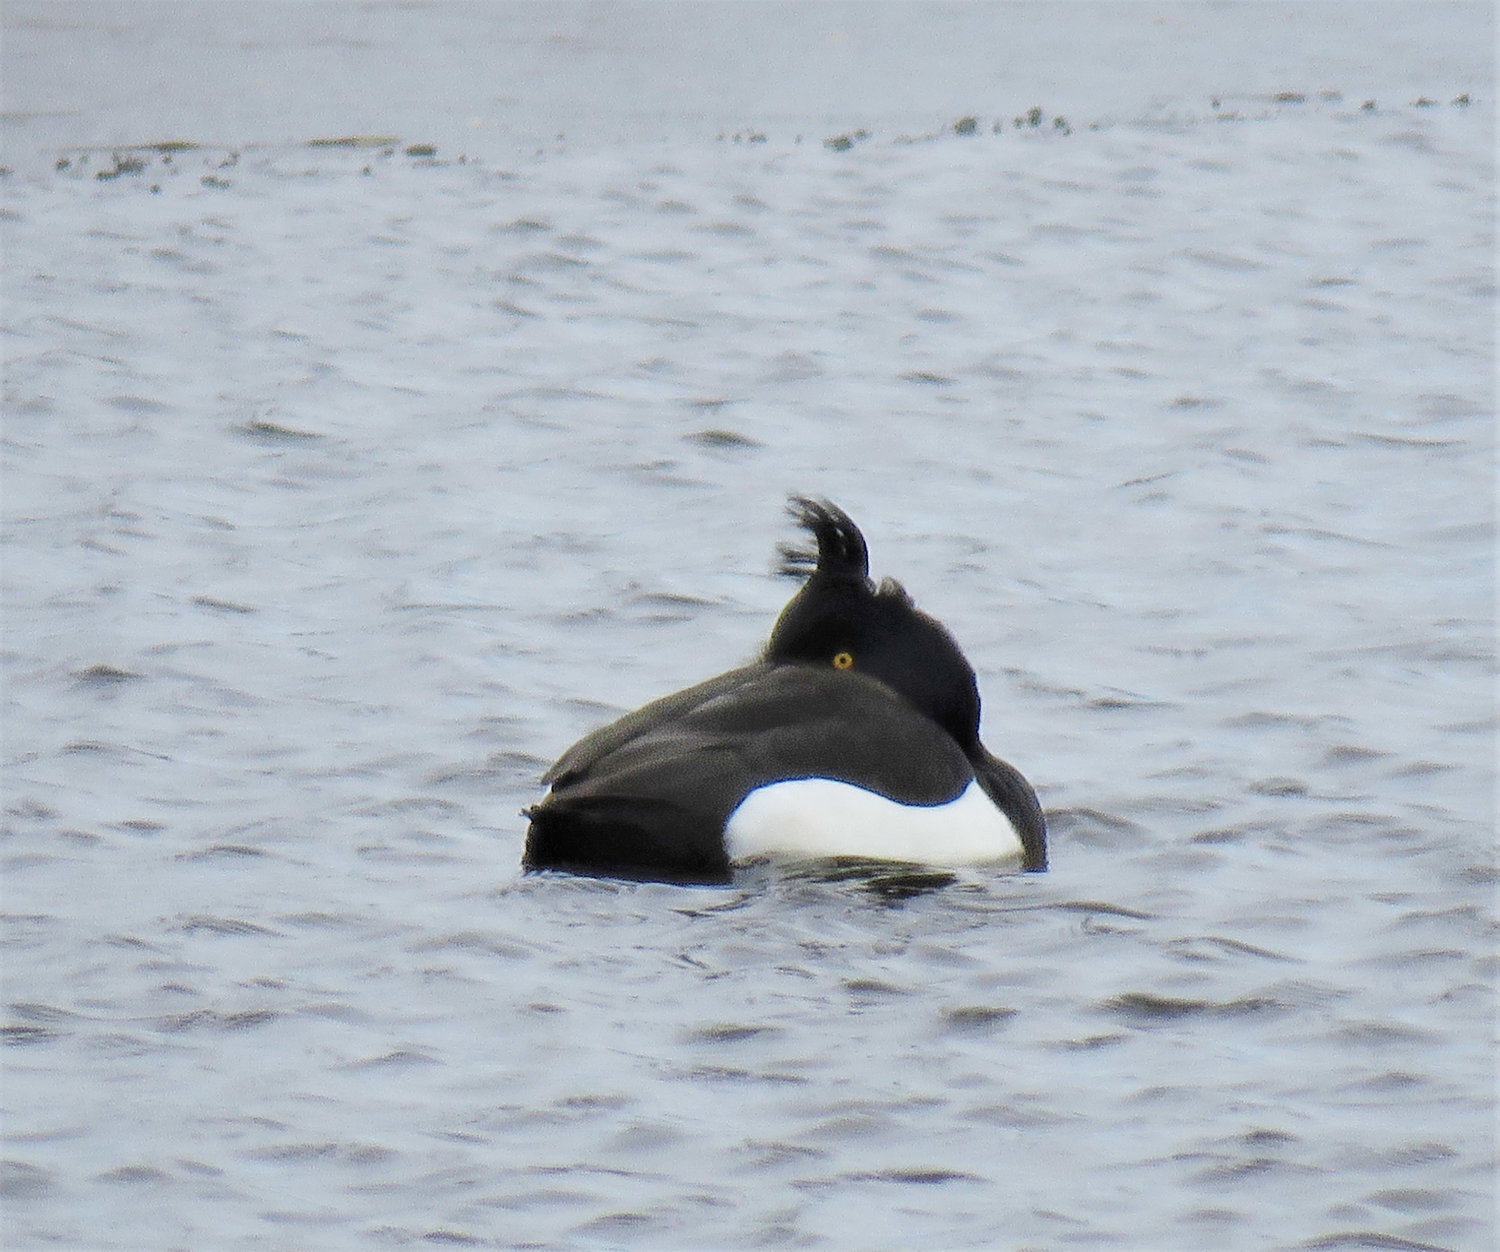 A male Tufted Duck with a well-grown “pony-tail” of a head-tuft continued to be seen near Massasoit Bridge. It delighted members of the Sunday Bird Club who had not caught up with it earlier this year.